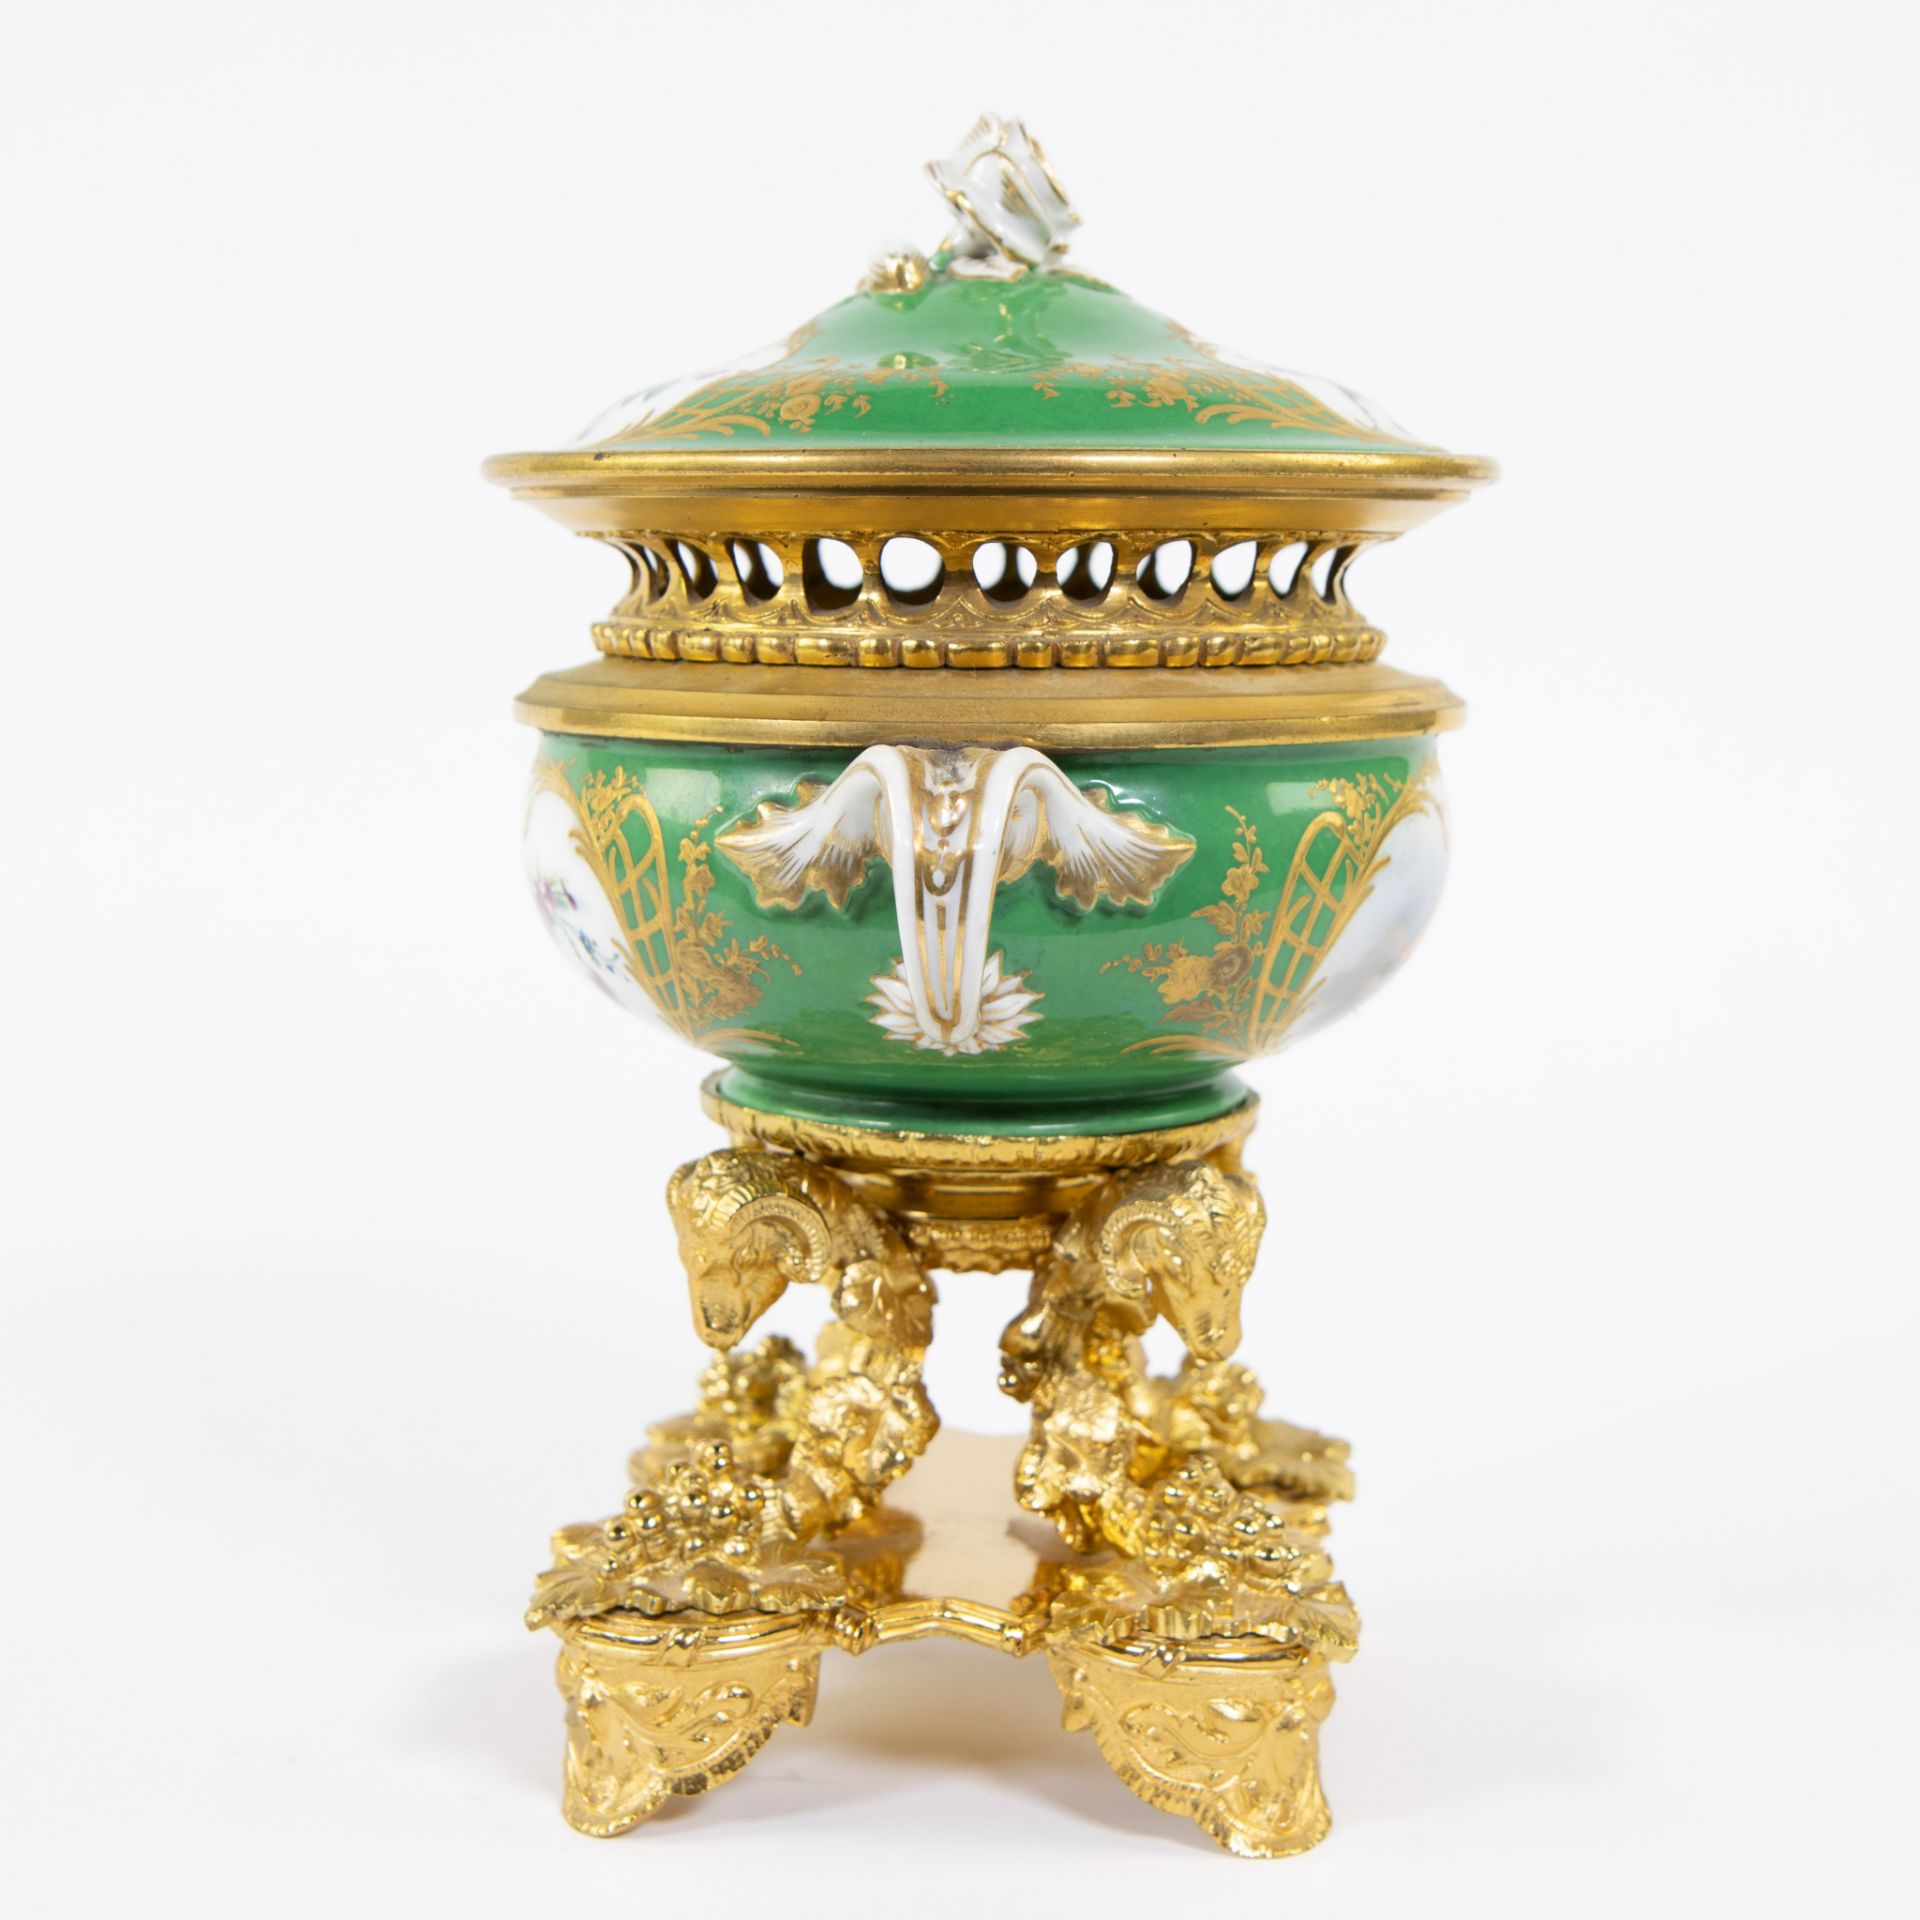 Porcelain table piece with gilt bronze fittings of rams' heads and bunches of grapes. Handpainted wi - Image 5 of 7